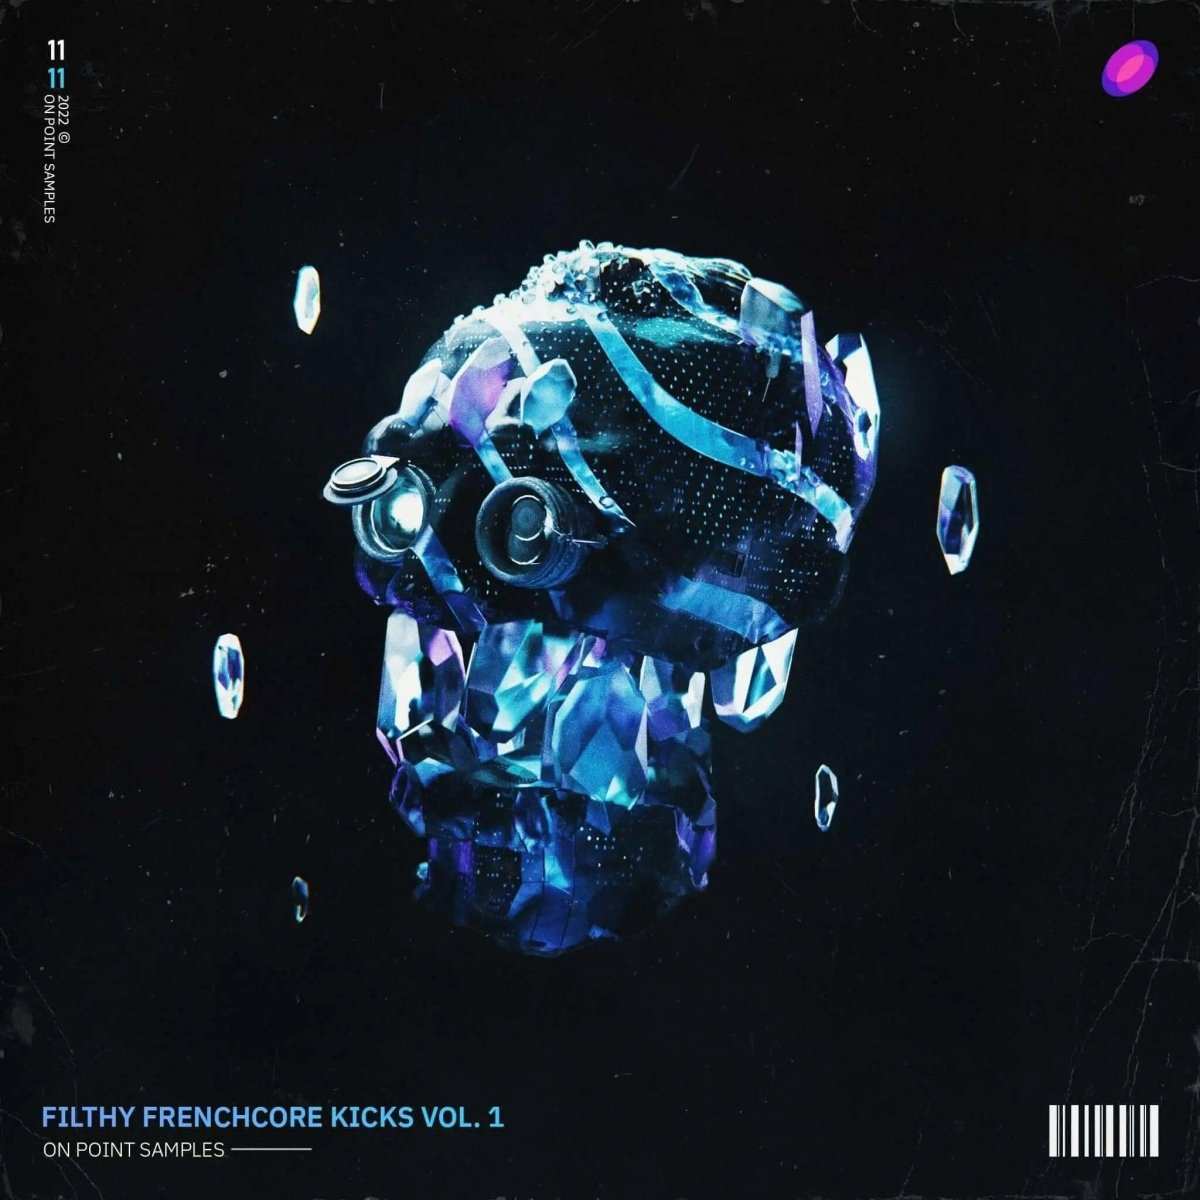 Filthy Frenchcore Kicks Vol. 1 - On Point Samples